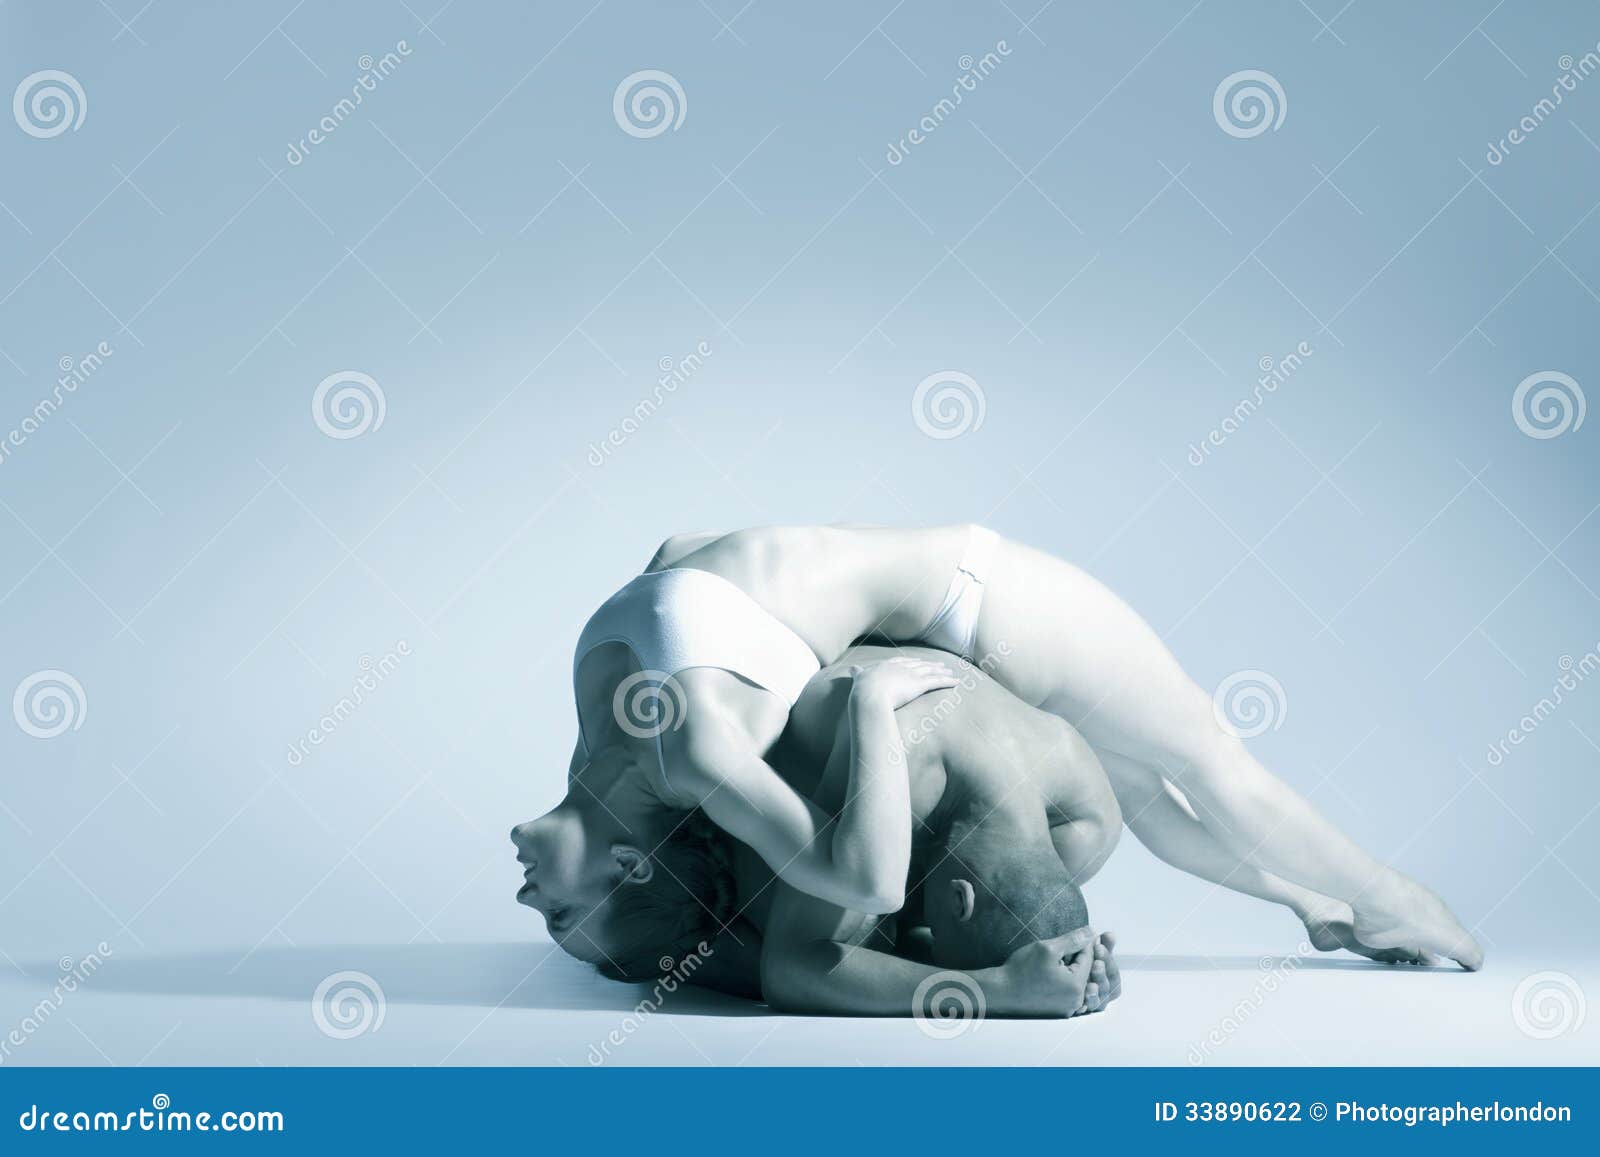 modern dance couple performing over blue background